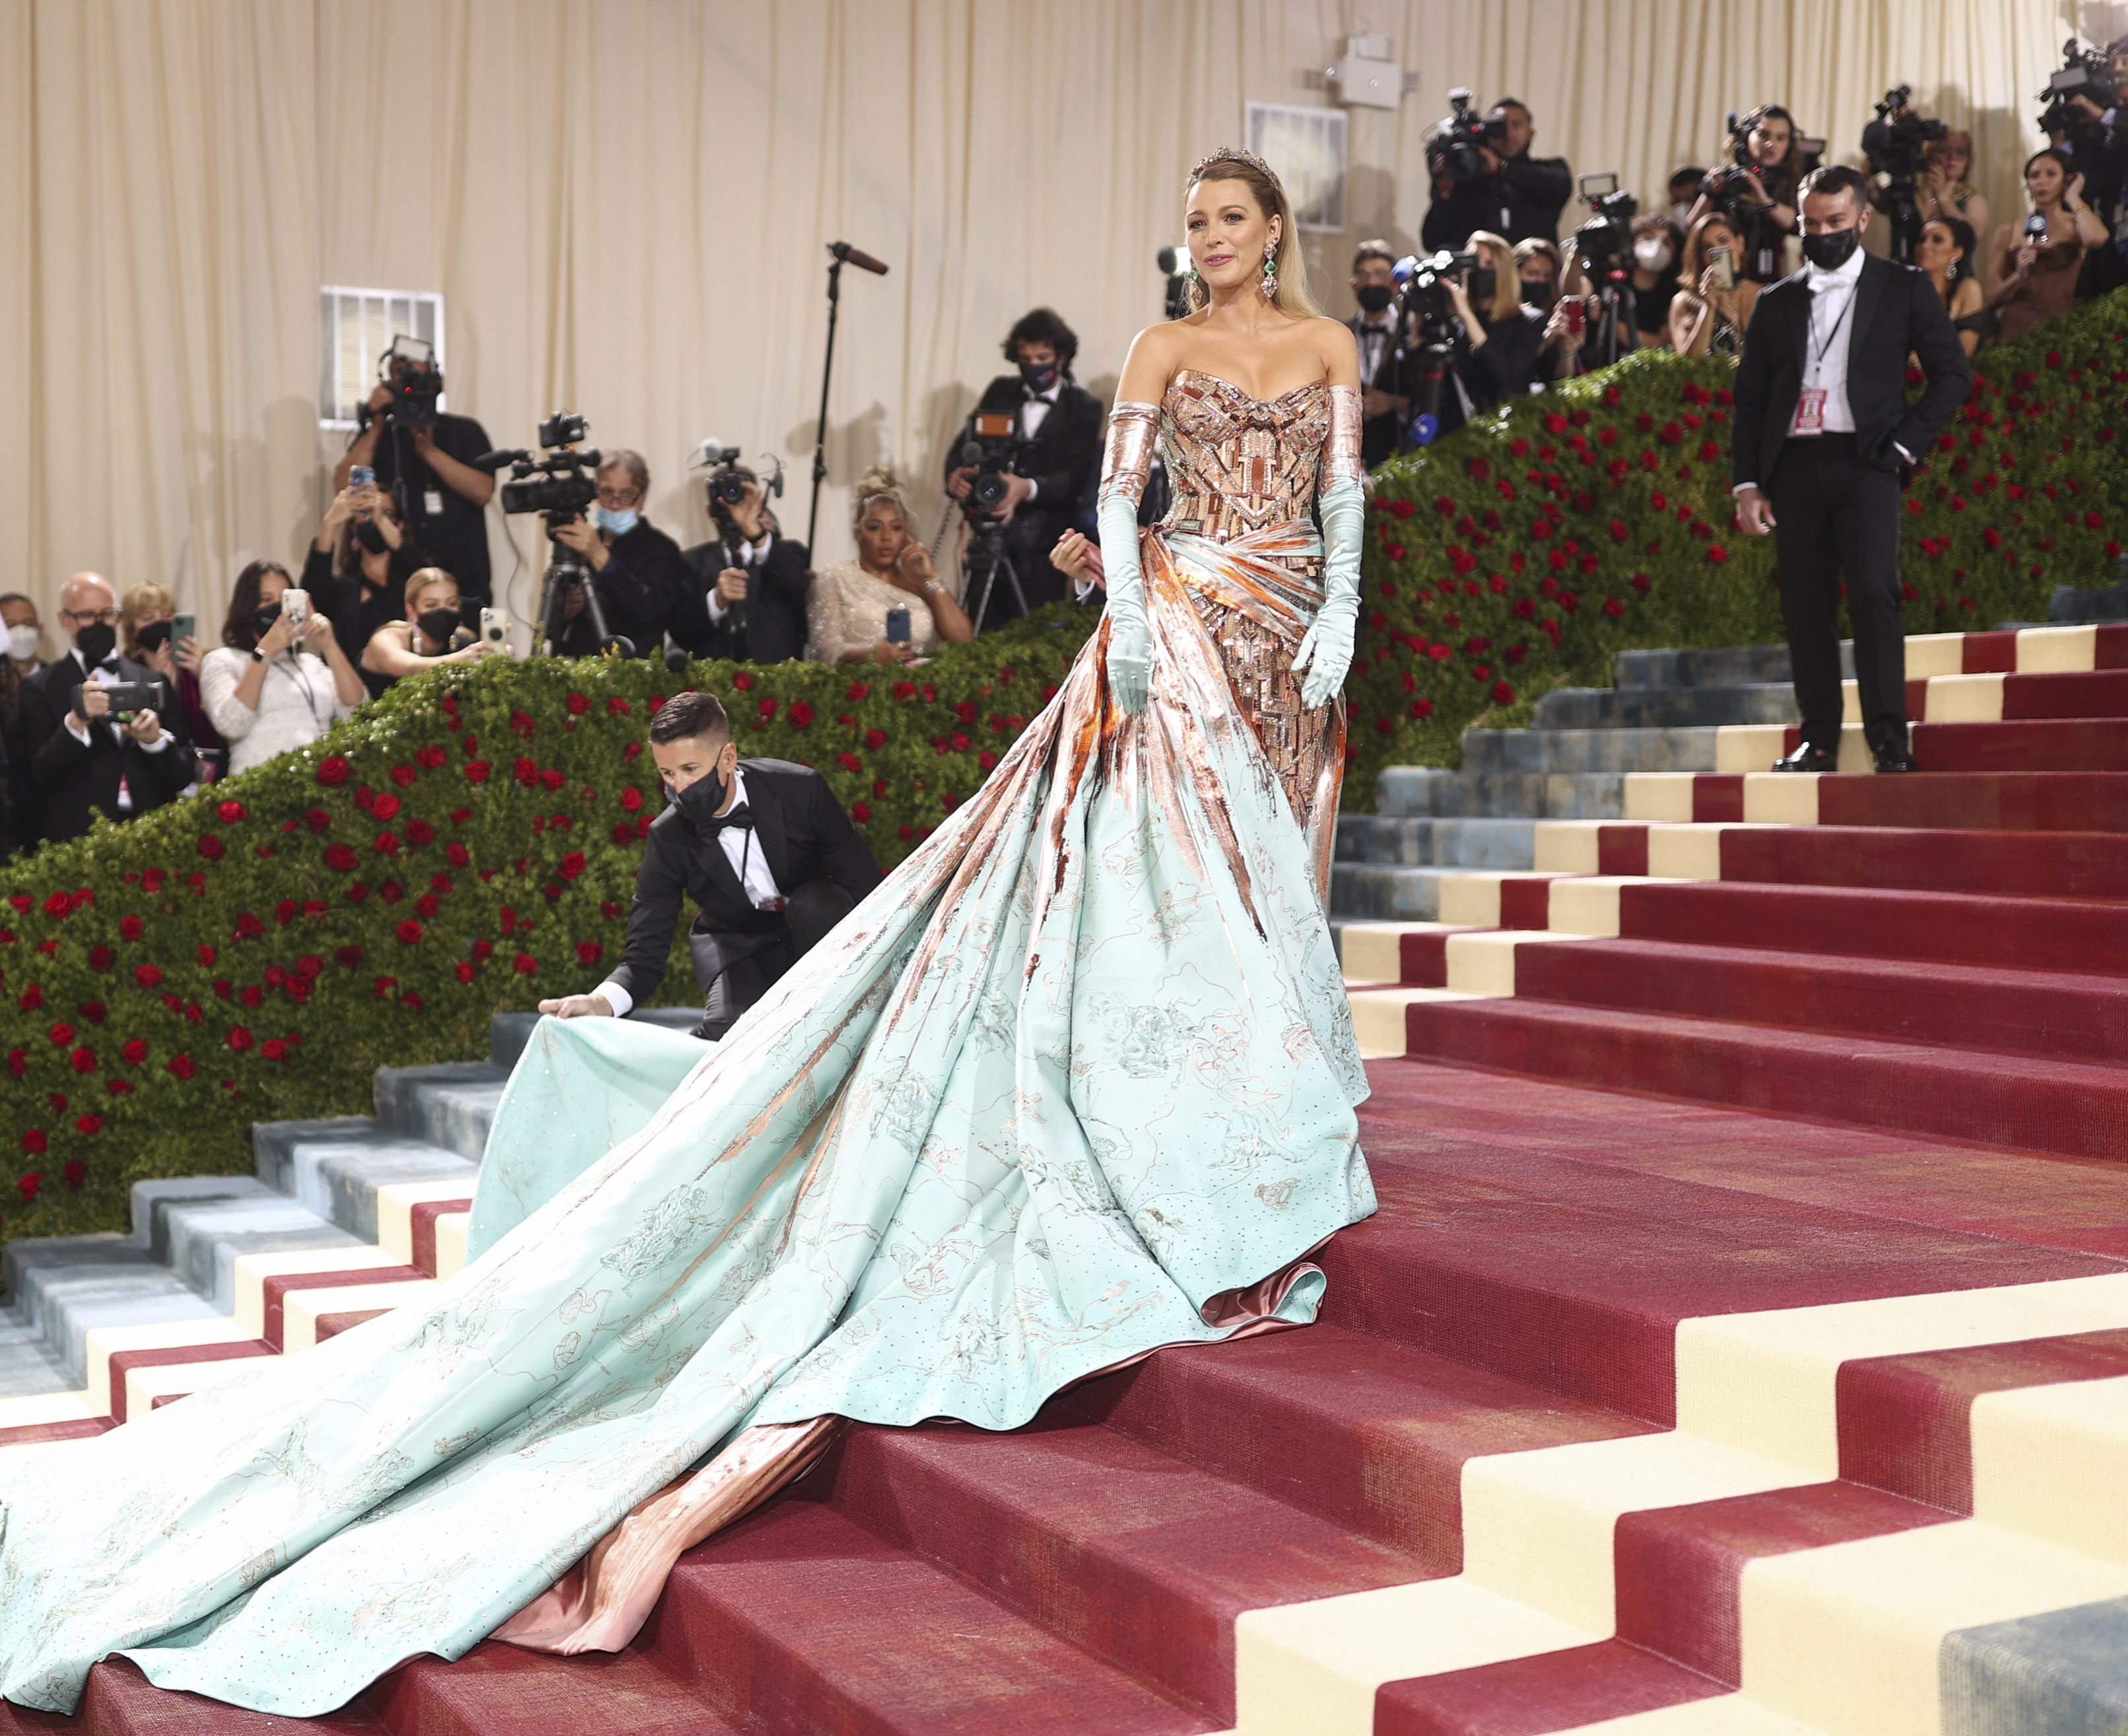 Blake Lively at The 2022 Met Gala at the The Metropolitan Museum of Art on May 2, 2022 in New York City. | Source: Getty Images